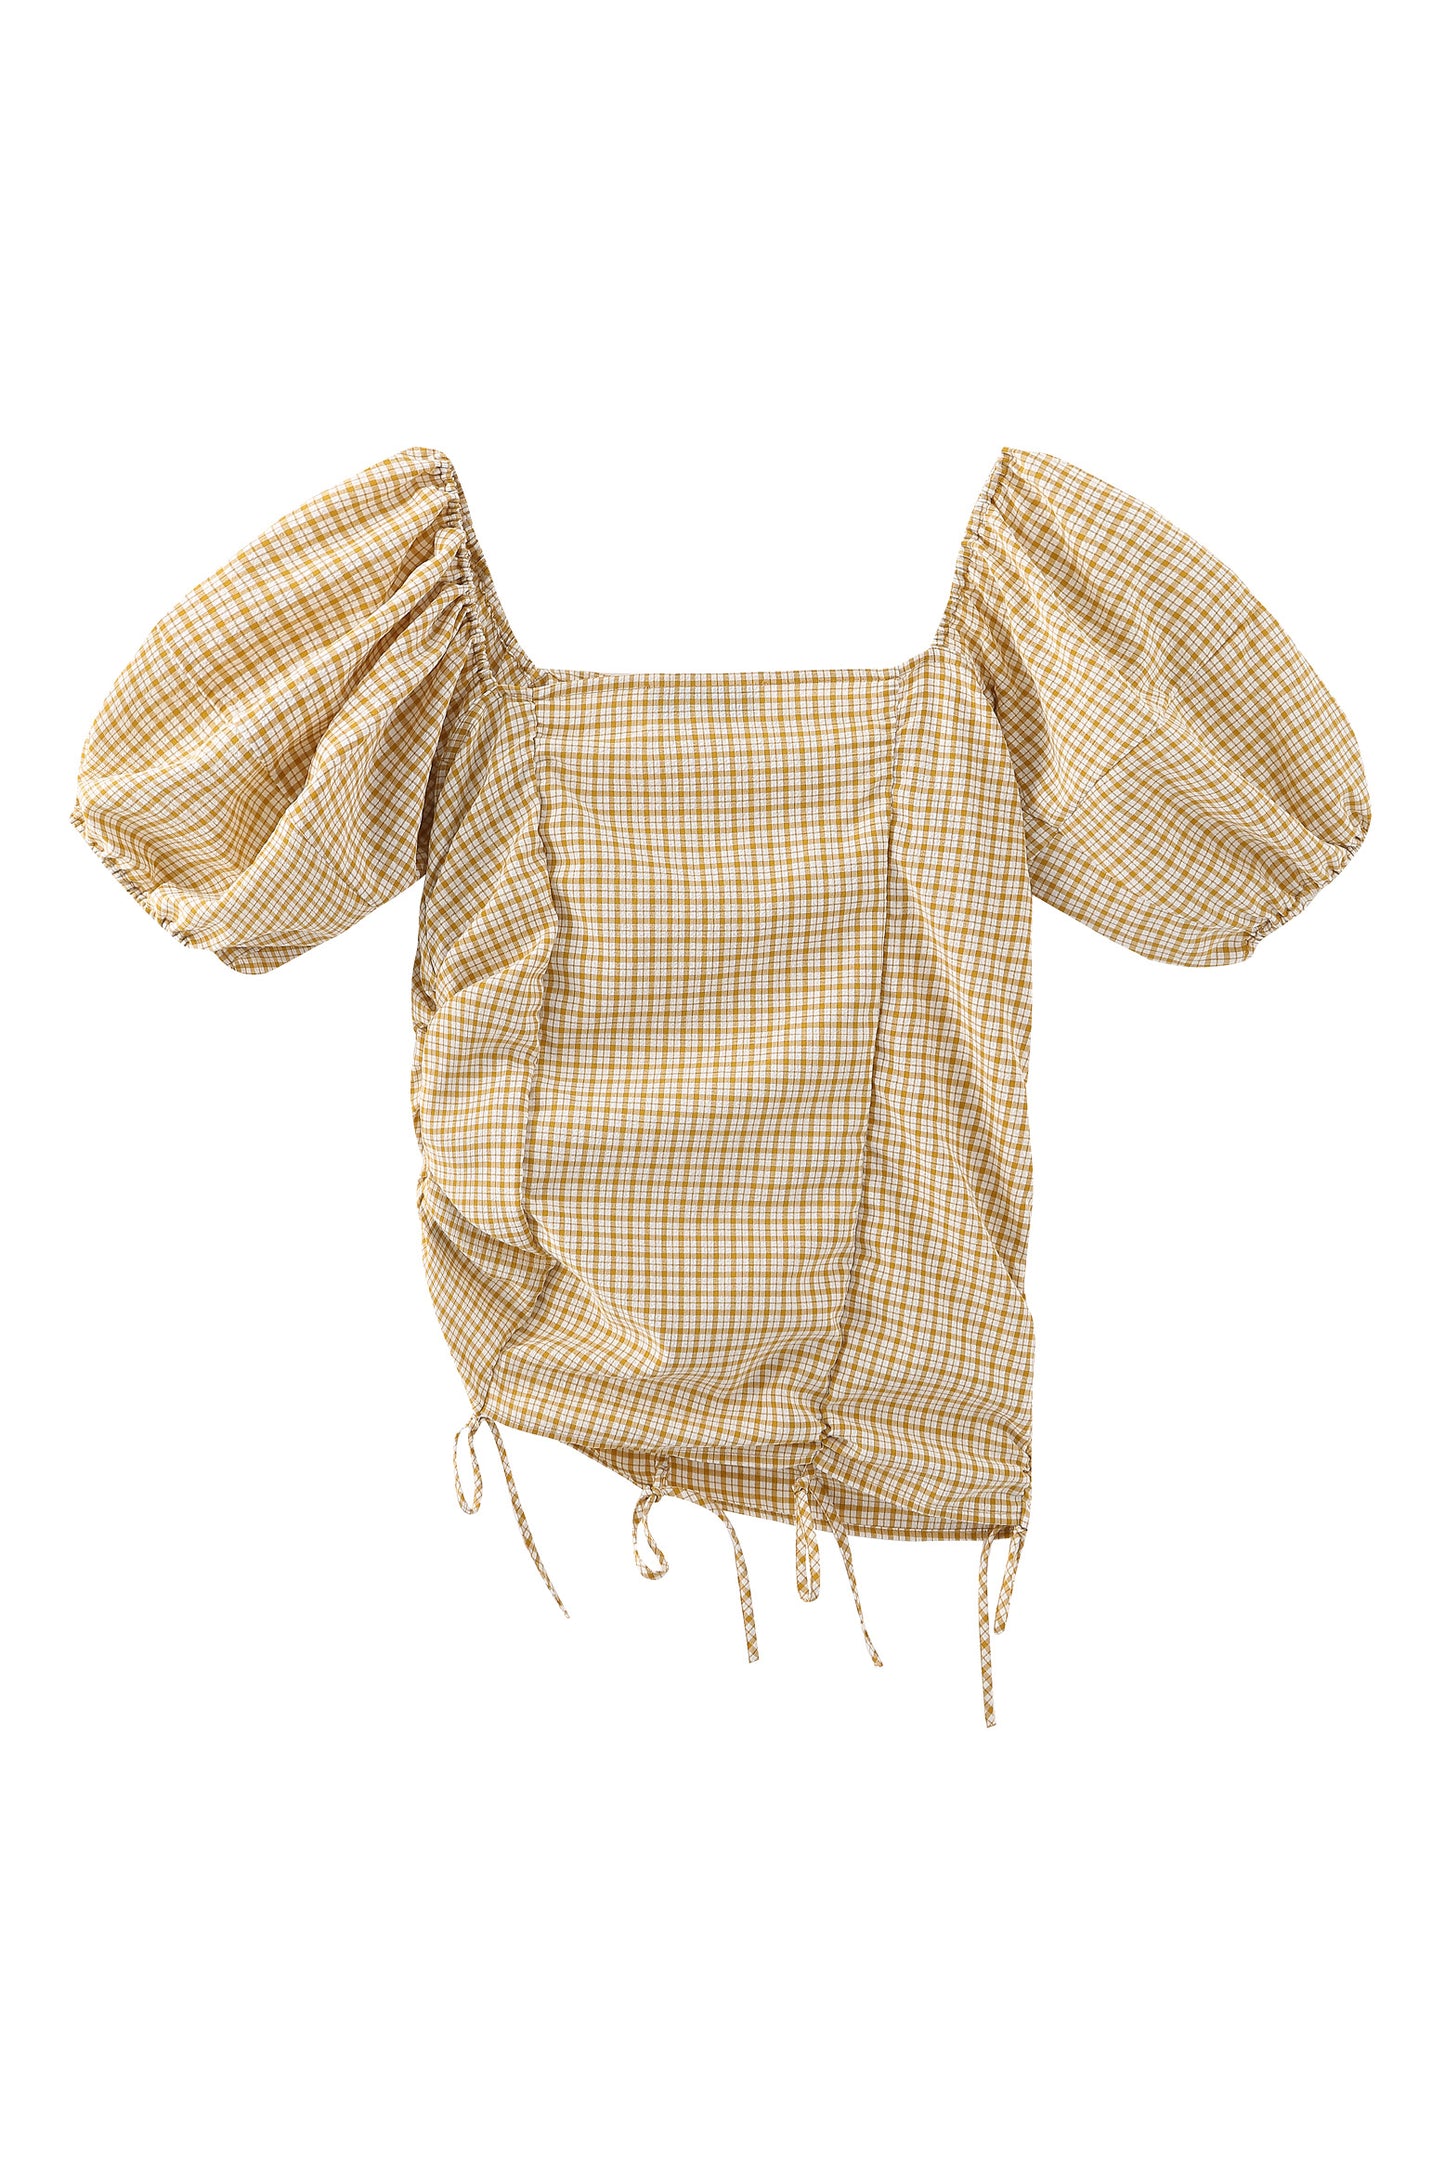 Baby Pina top in yellow gingham